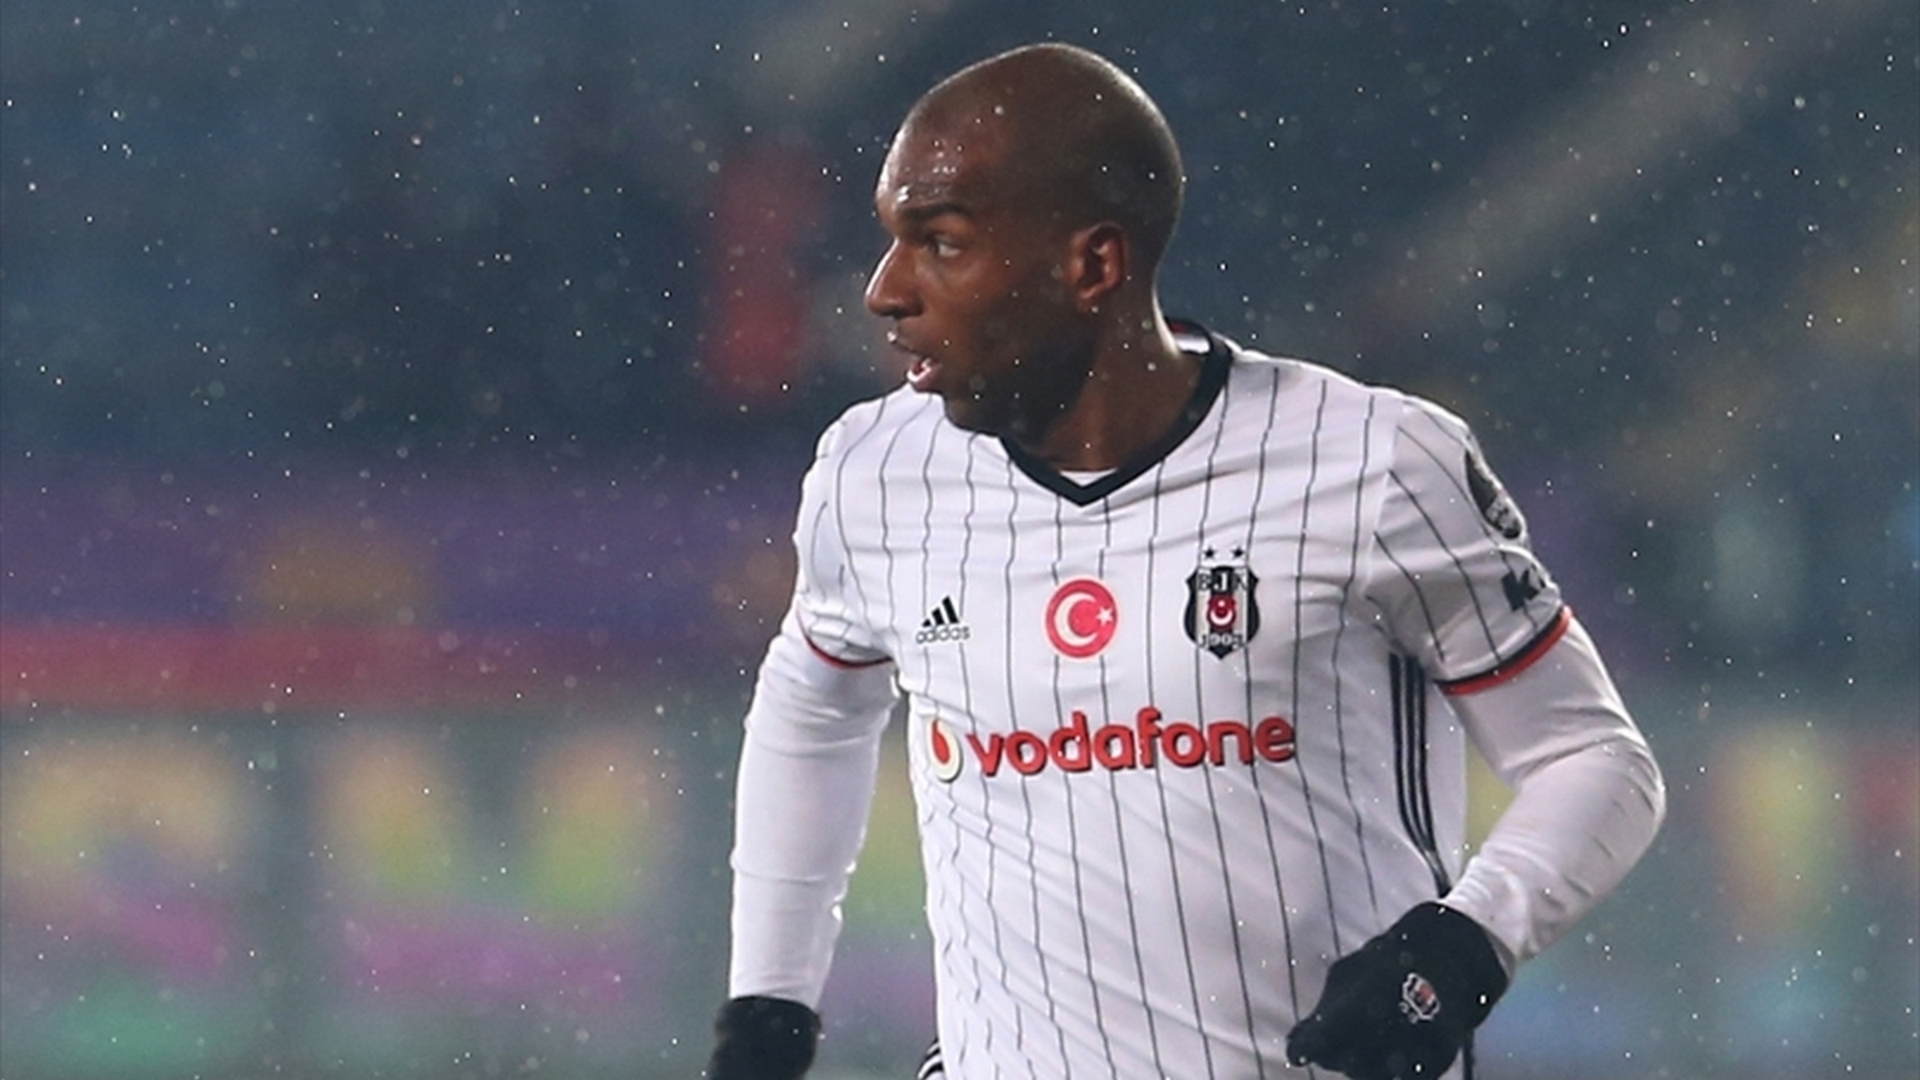 Talisca was loaned out last season to Beşiktaş and enjoyed a very good campaign.